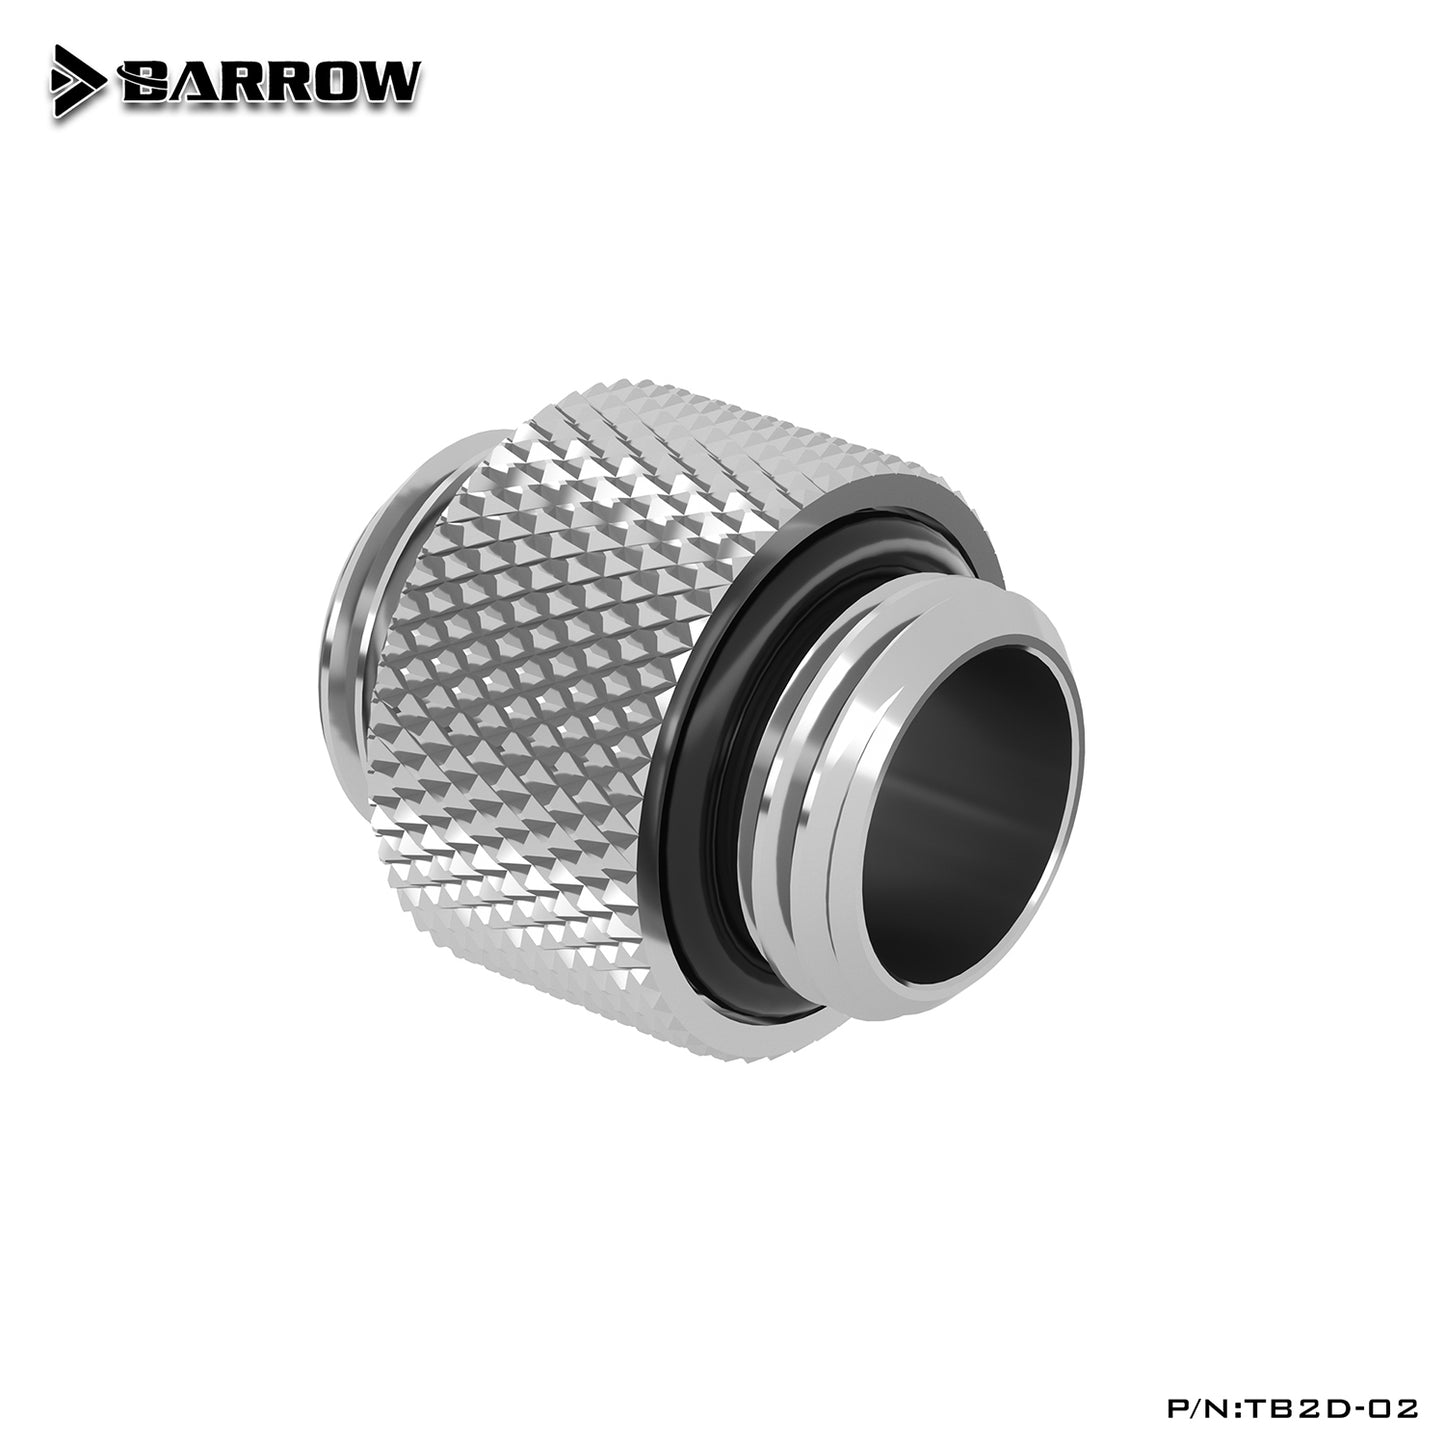 Barrow Male To Male Fitting, G1/4'' Connection Adapter,Water Cooling Fitting, TB2D-02